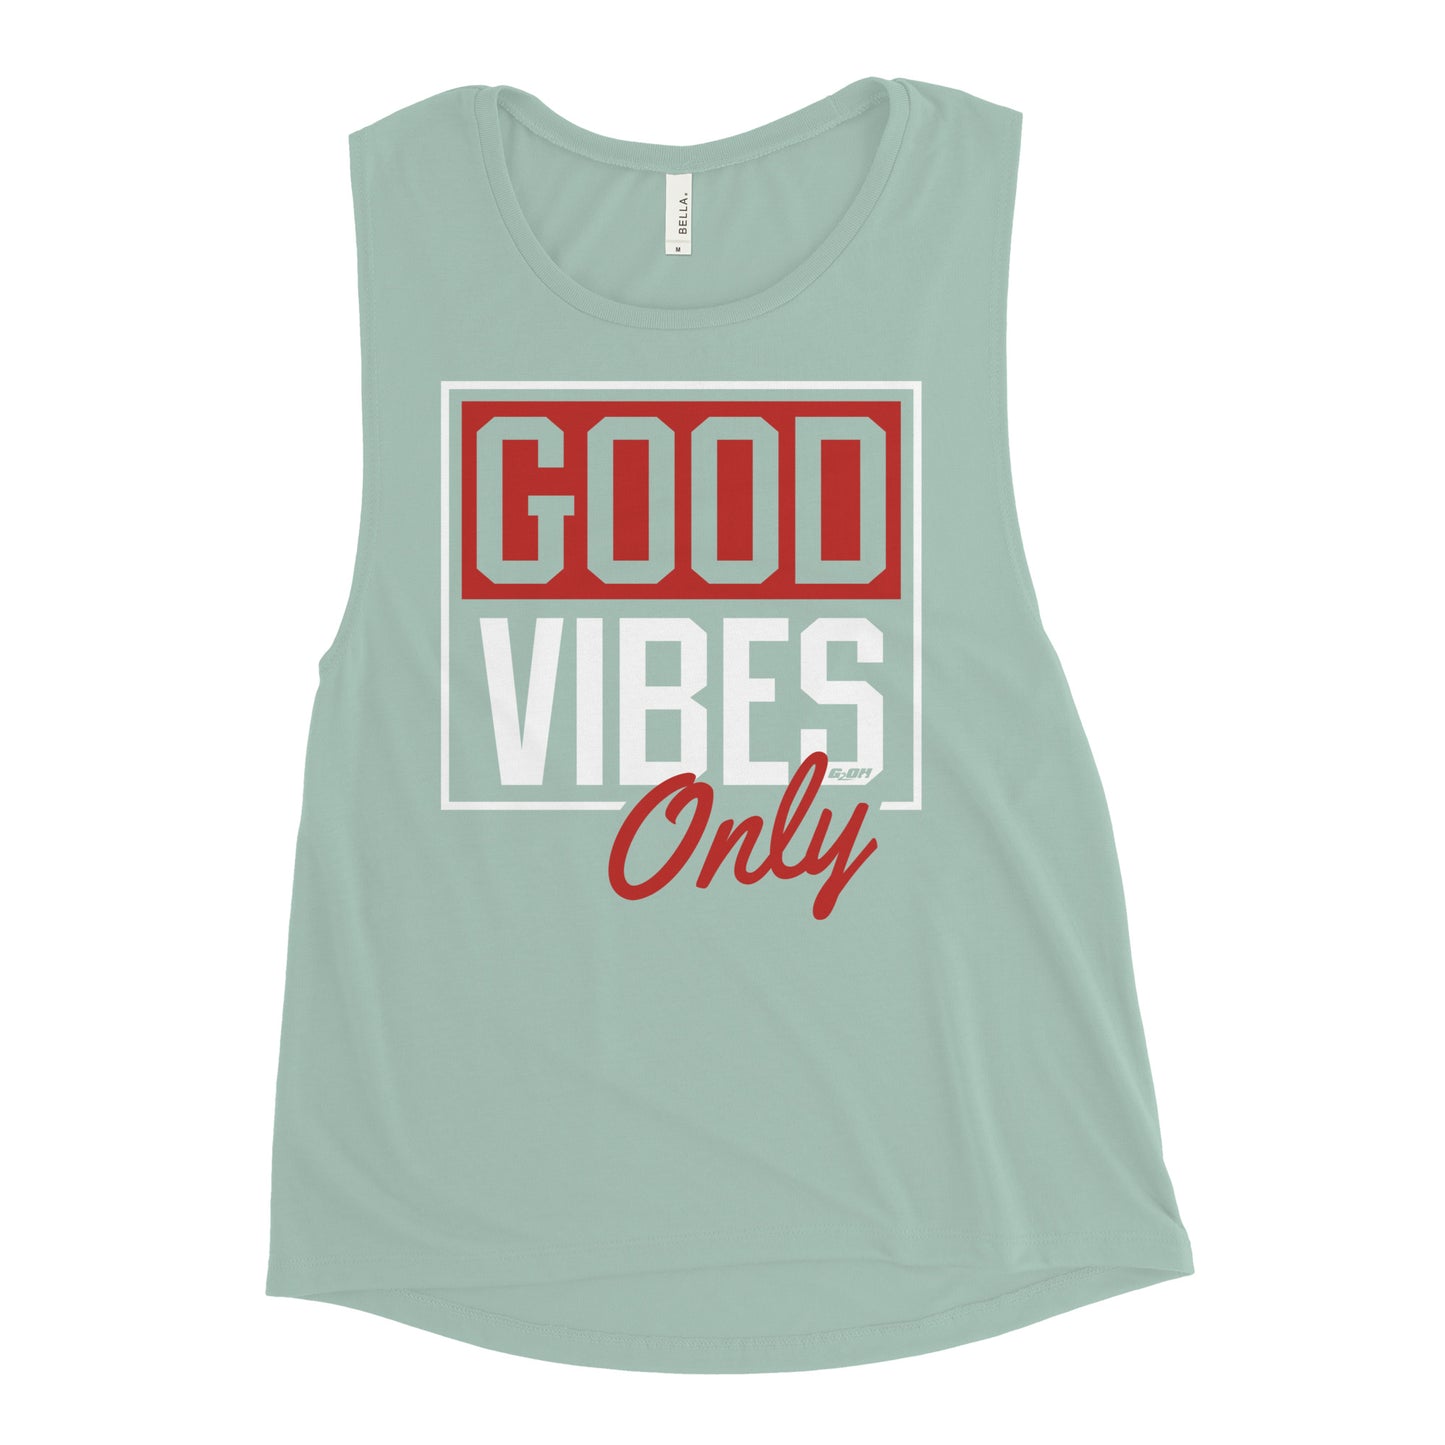 Good Vibes Only Women's Muscle Tank